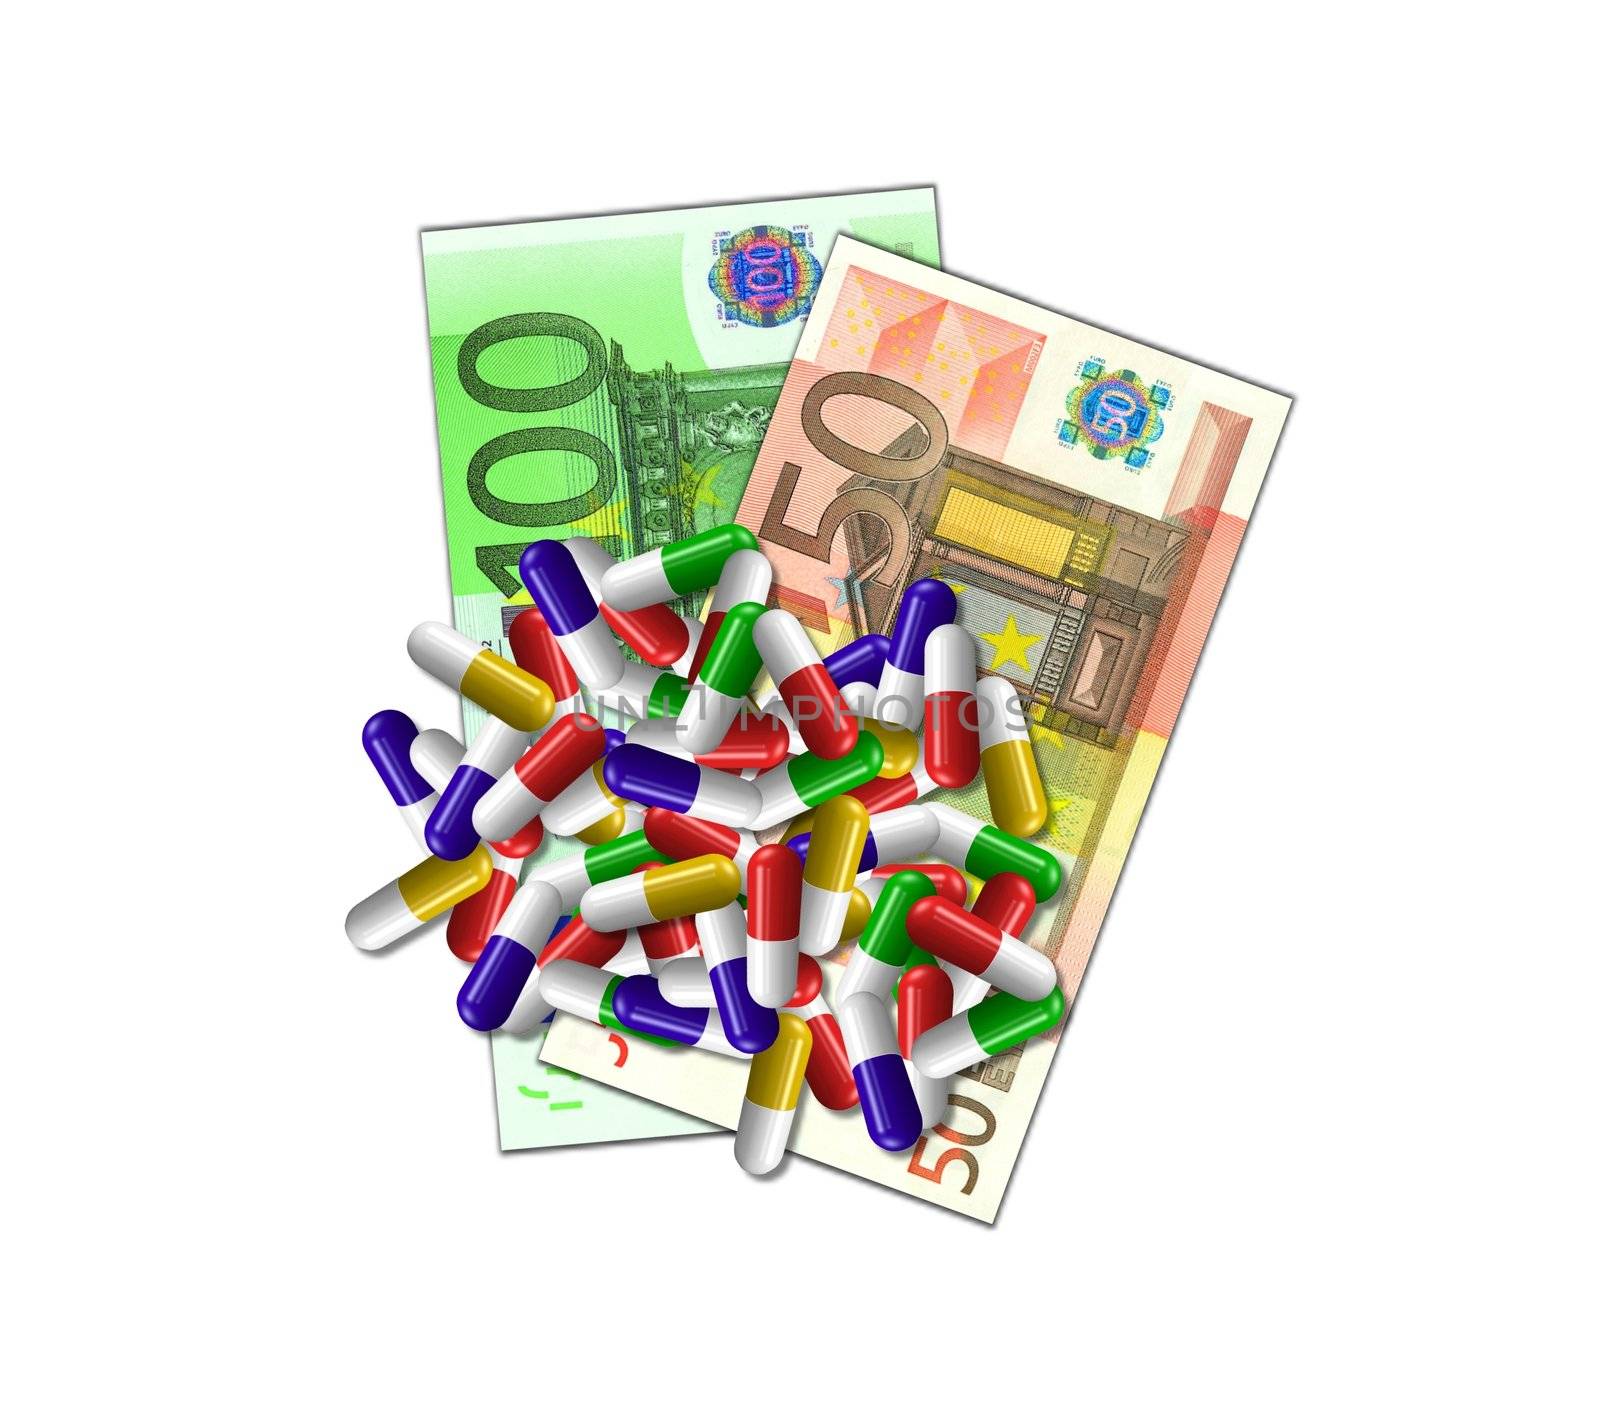 expensive pills by peromarketing